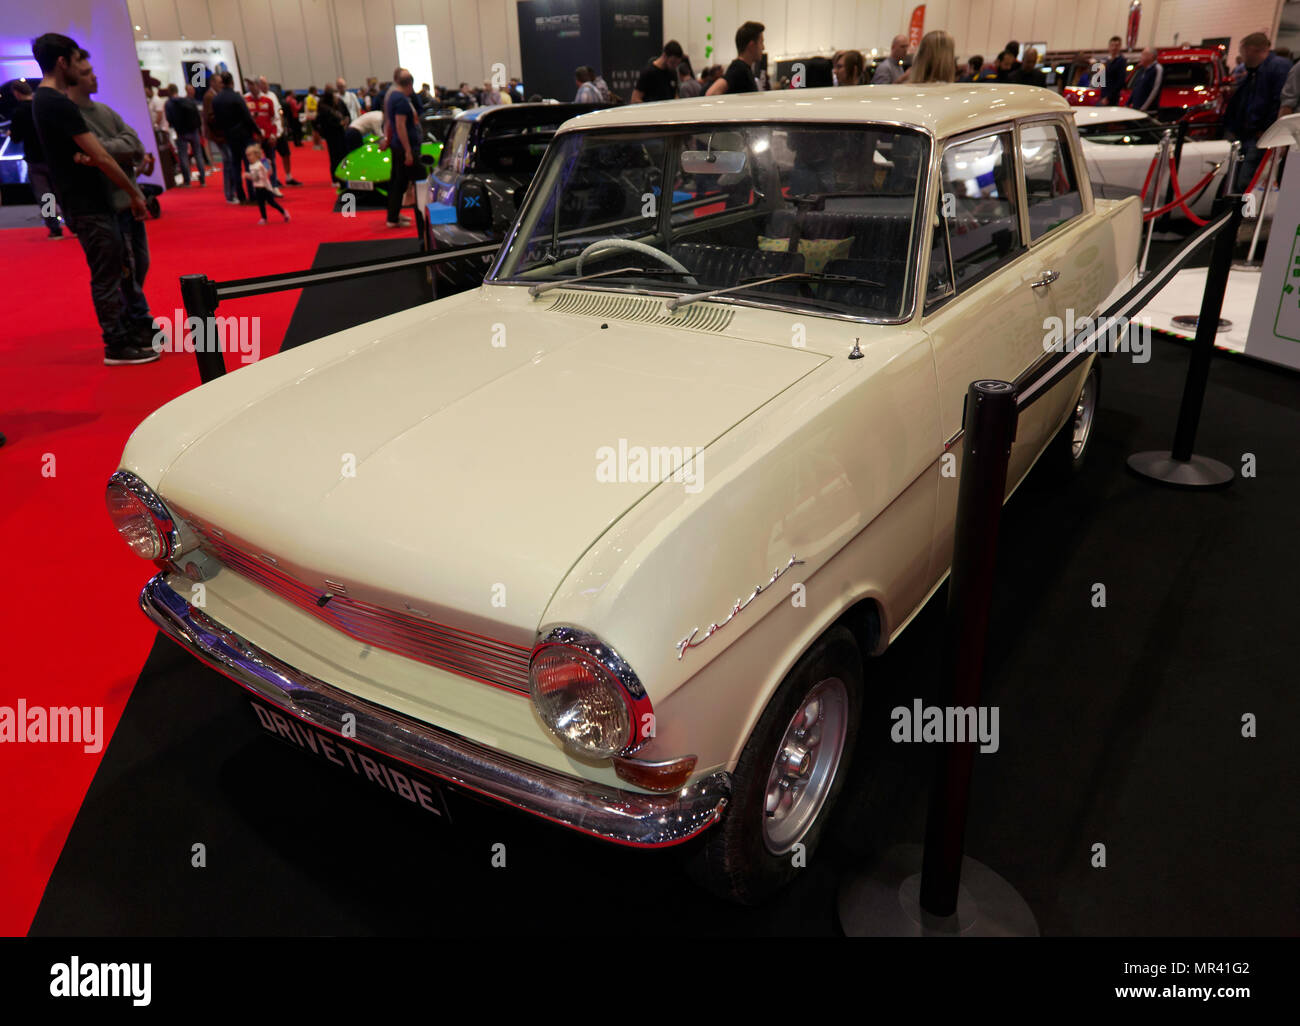 Tectonic Abundantly Faial Richard Hammond's 1963 Opel Kadett which he drove in the Top Gear Botswana  Special, on display at the DRIVETRIBE stand of the 2018 London Motor Show  Stock Photo - Alamy